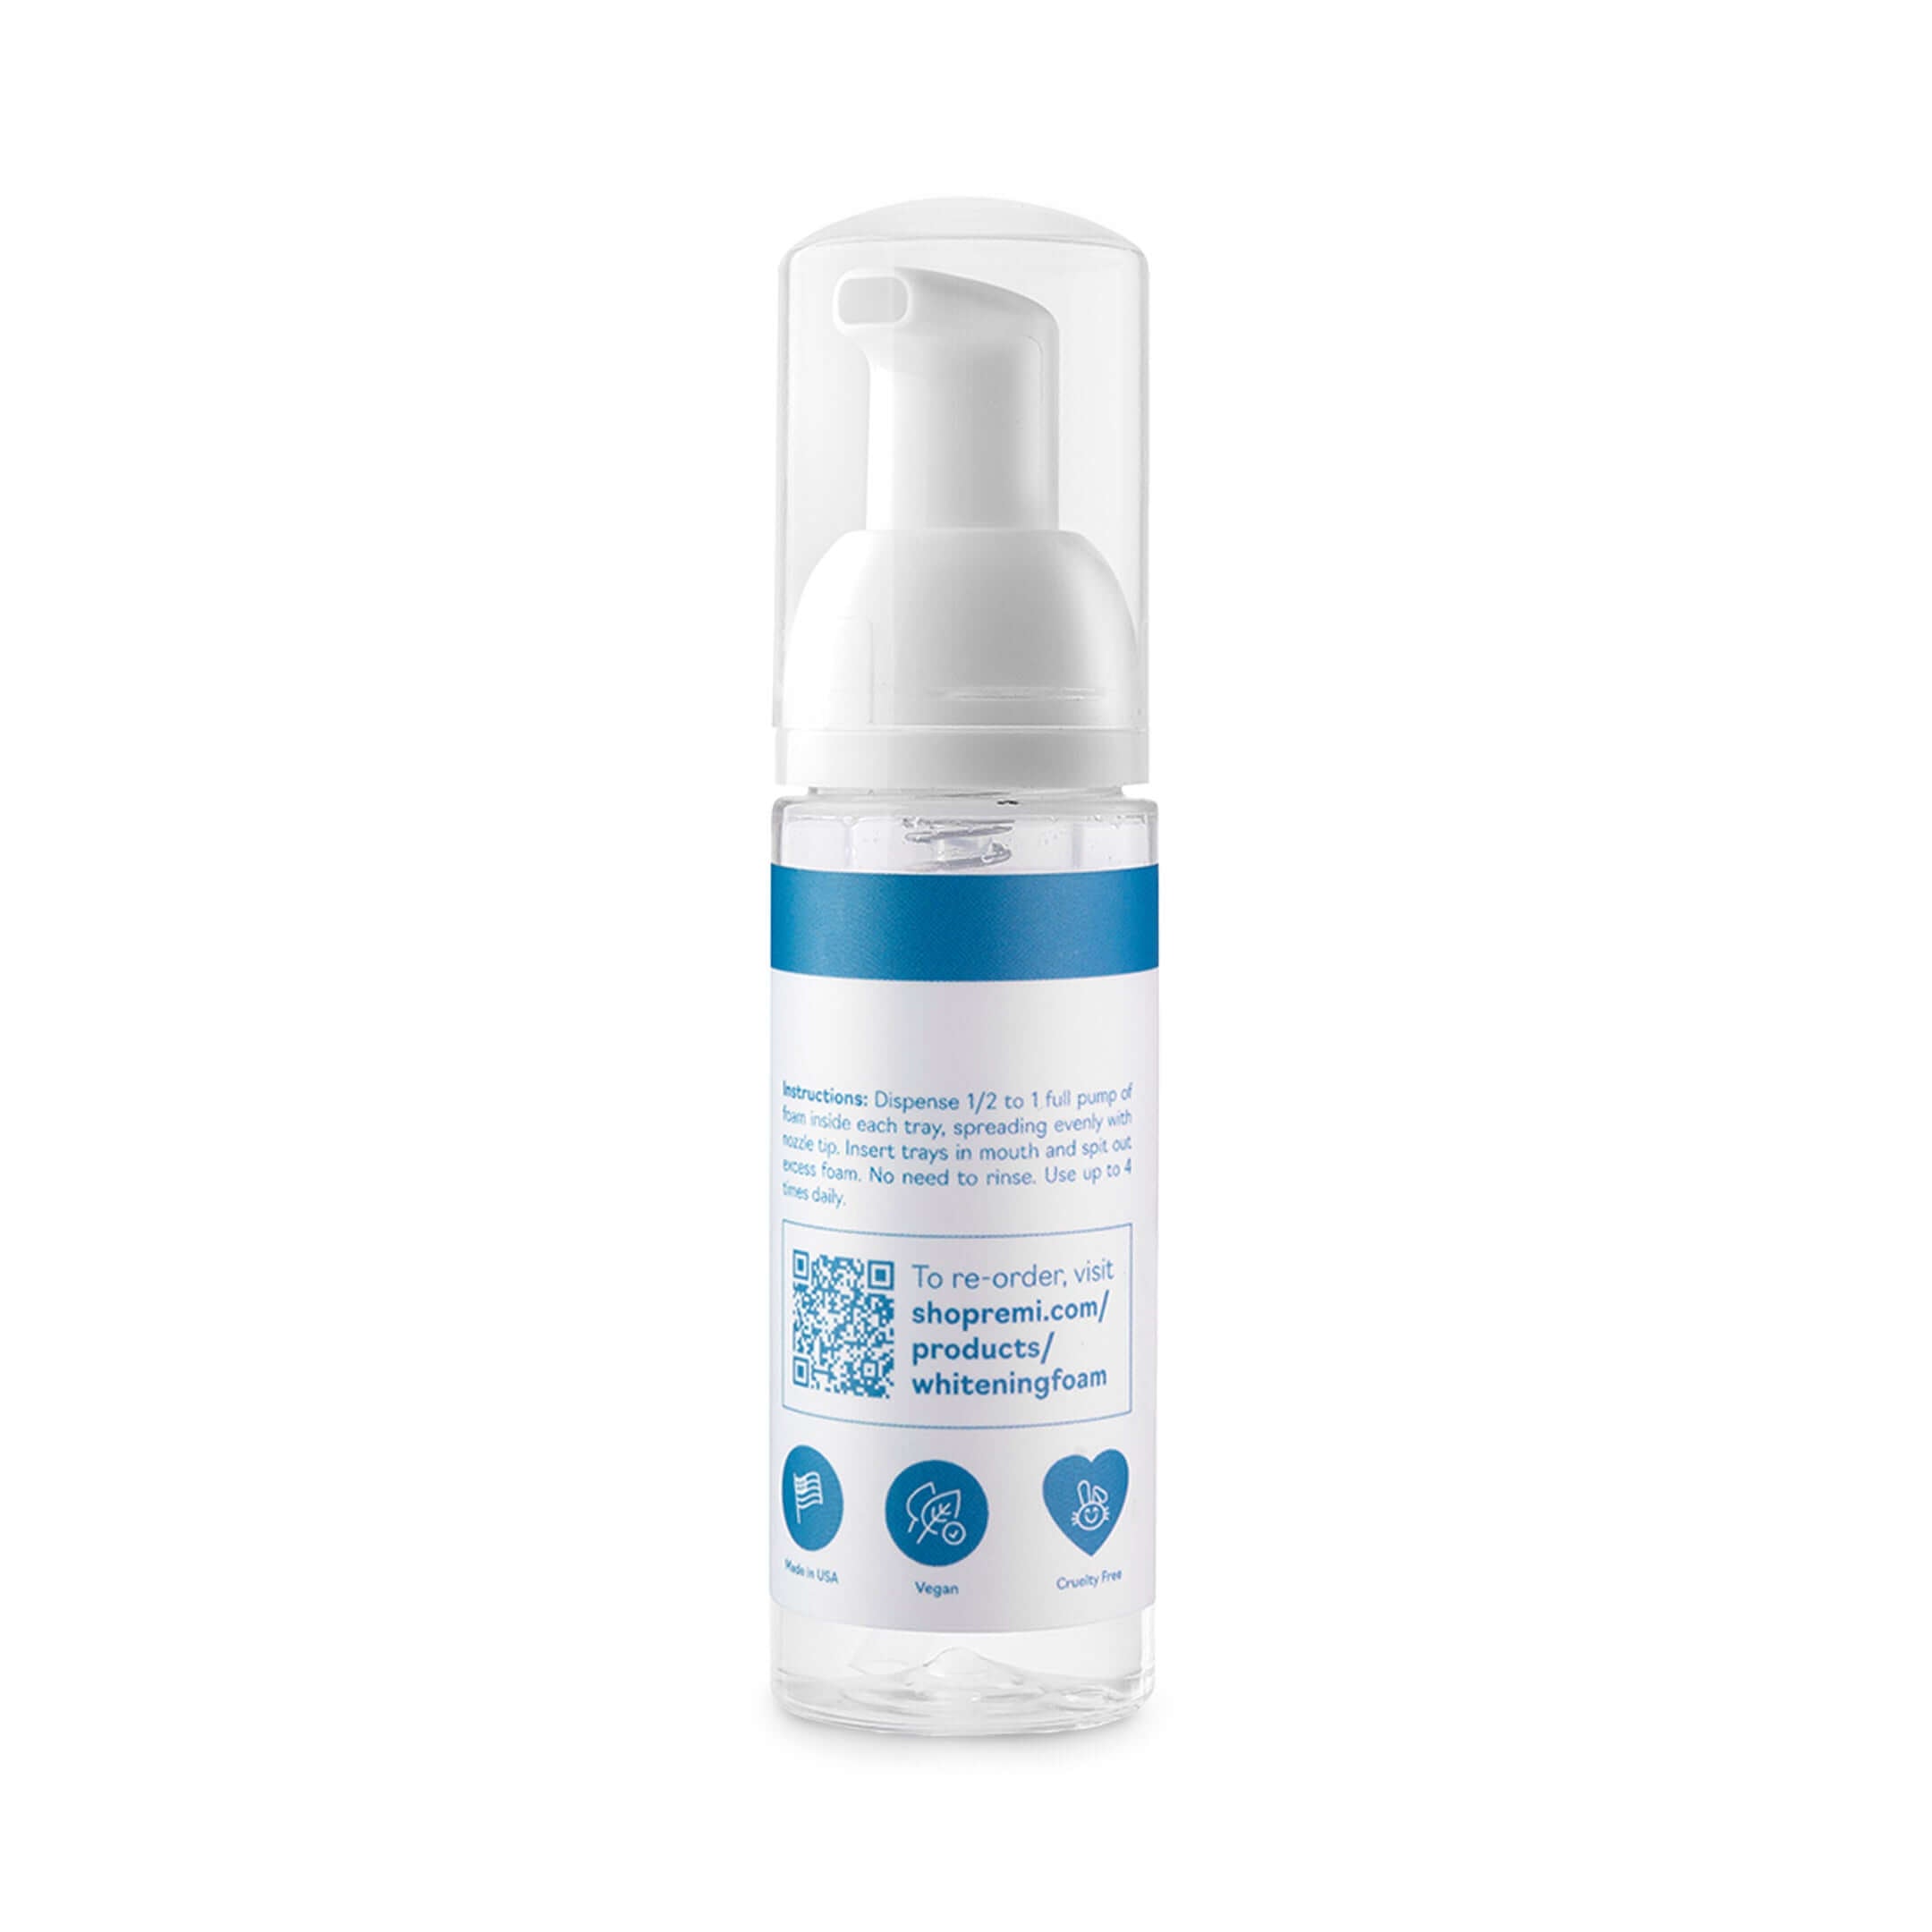 A white and blue dispenser bottle with a foam pump. The label includes usage instructions and features a QR code for re-ordering. Bottom icons show it is vegan, cruelty-free, and recyclable—perfect for maintaining your Night Guard Cleaning + Teeth Whitening Foam (Pack of 2) routine.